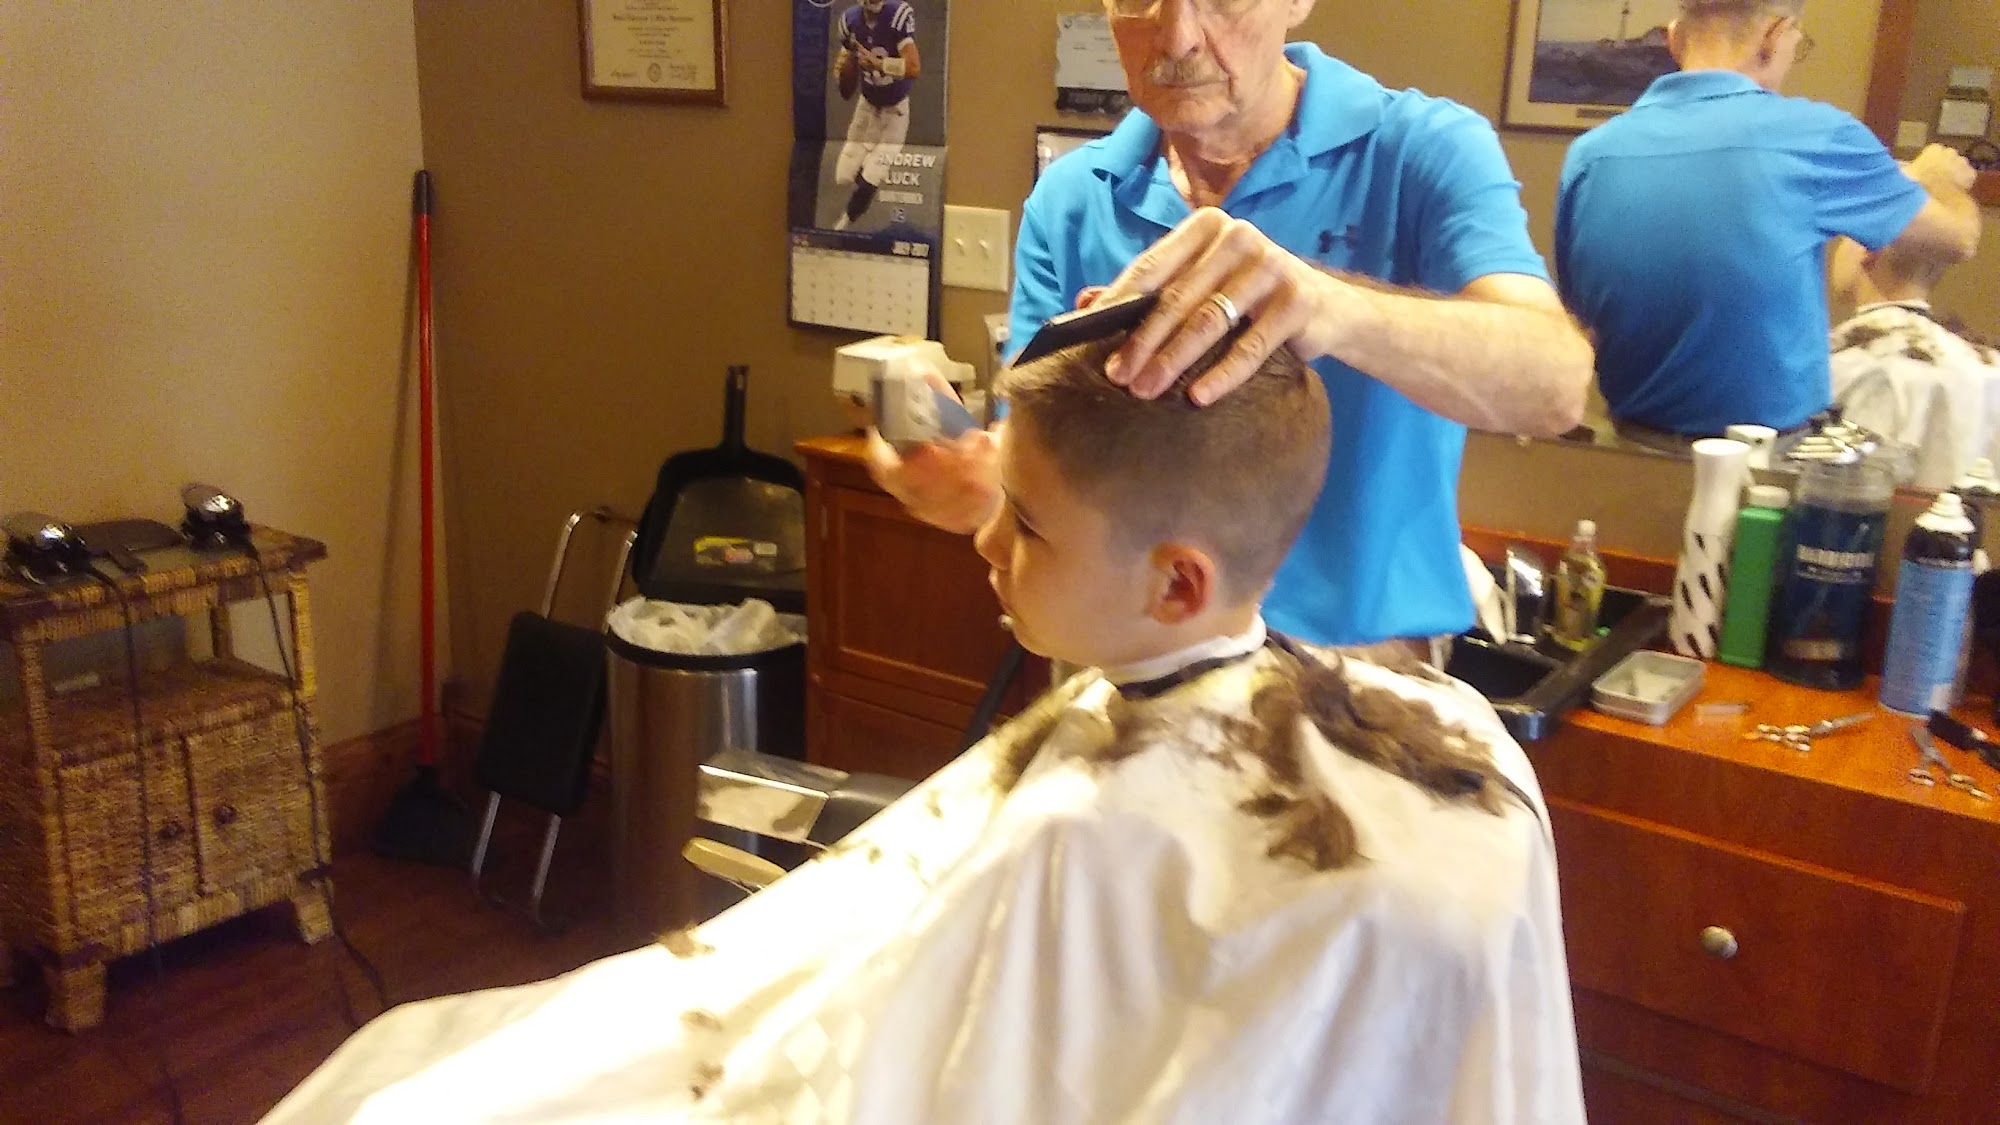 Runkle Barber Shop, Appointment Recommended! 110 N Mishawaka St, Akron Indiana 46910